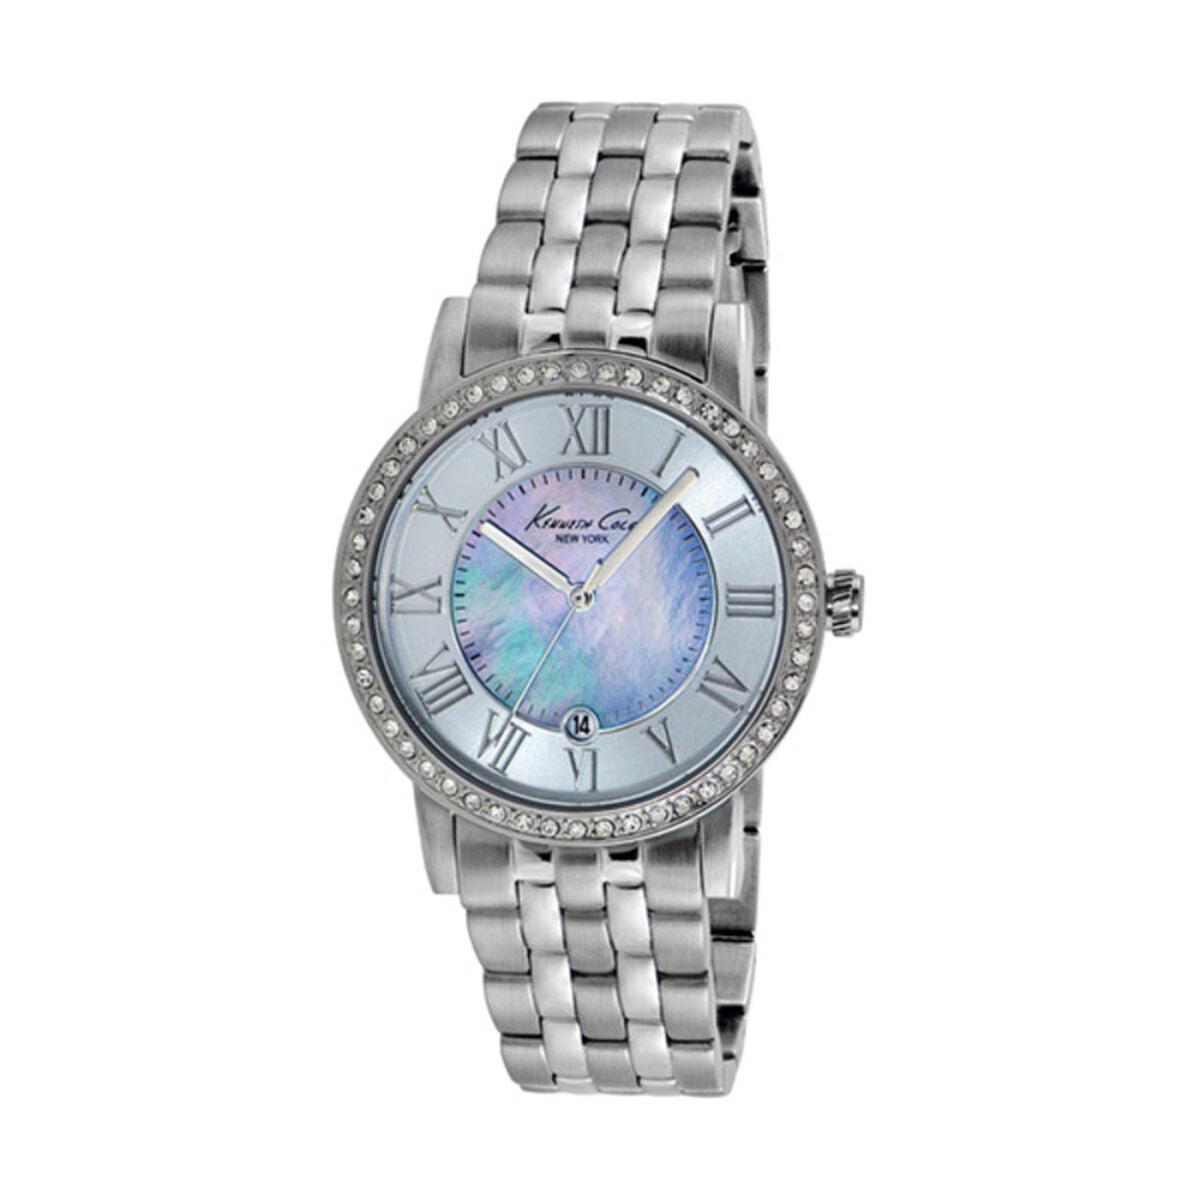 Ladies' Watch Kenneth Cole IKC4973 (Ø 36 mm), Kenneth Cole, Watches, Women, ladies-watch-kenneth-cole-ikc4973-o-36-mm, : Quartz Movement, :Silver, Brand_Kenneth Cole, category-reference-2570, category-reference-2635, category-reference-2995, category-reference-t-19667, category-reference-t-19725, Condition_NEW, fashion, gifts for women, hot deals, original gifts, Price_50 - 100, RiotNook